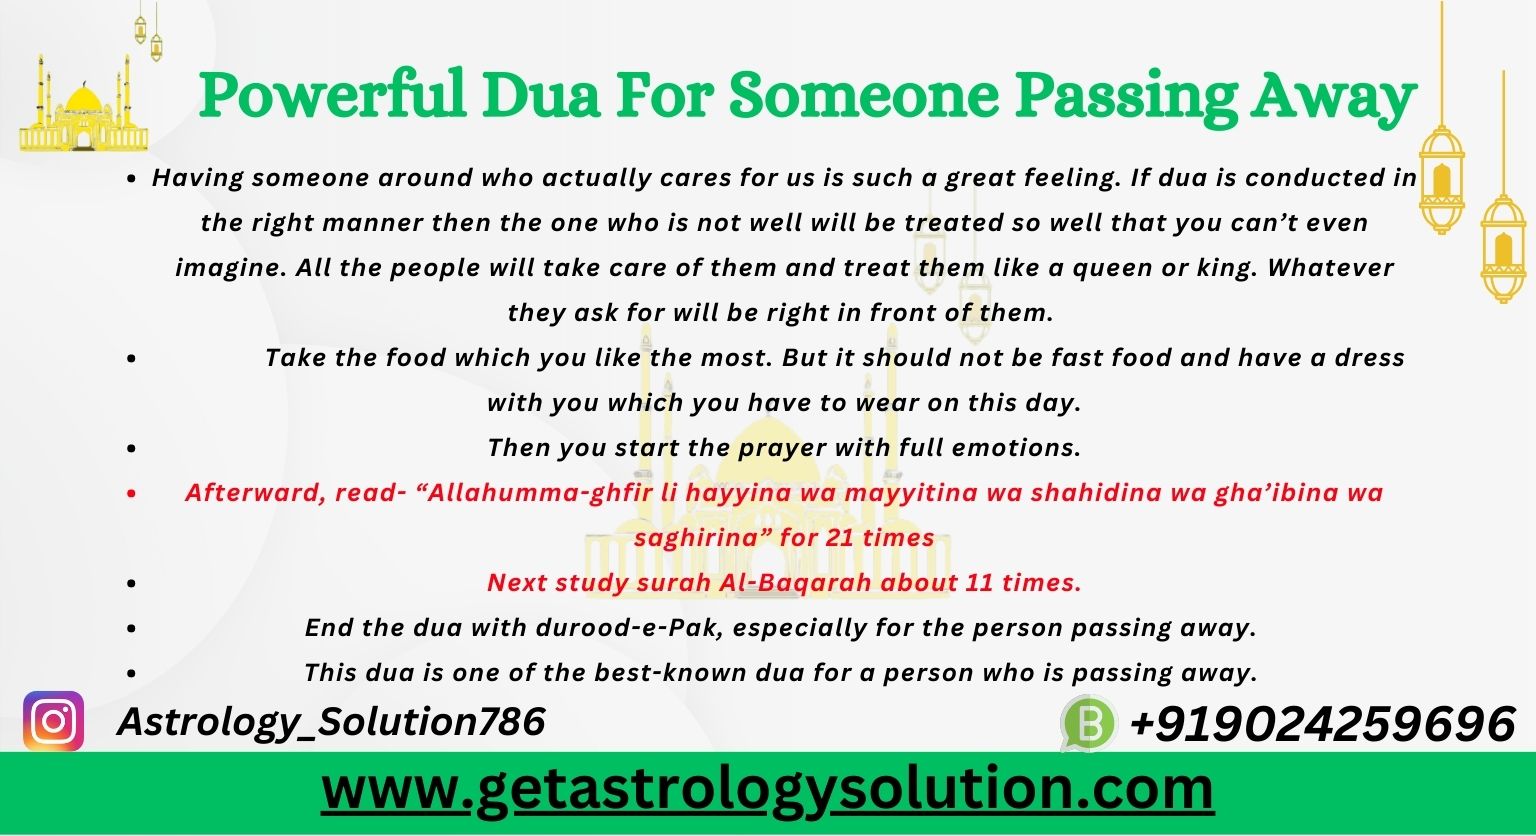 Powerful Dua For Someone Passing Away